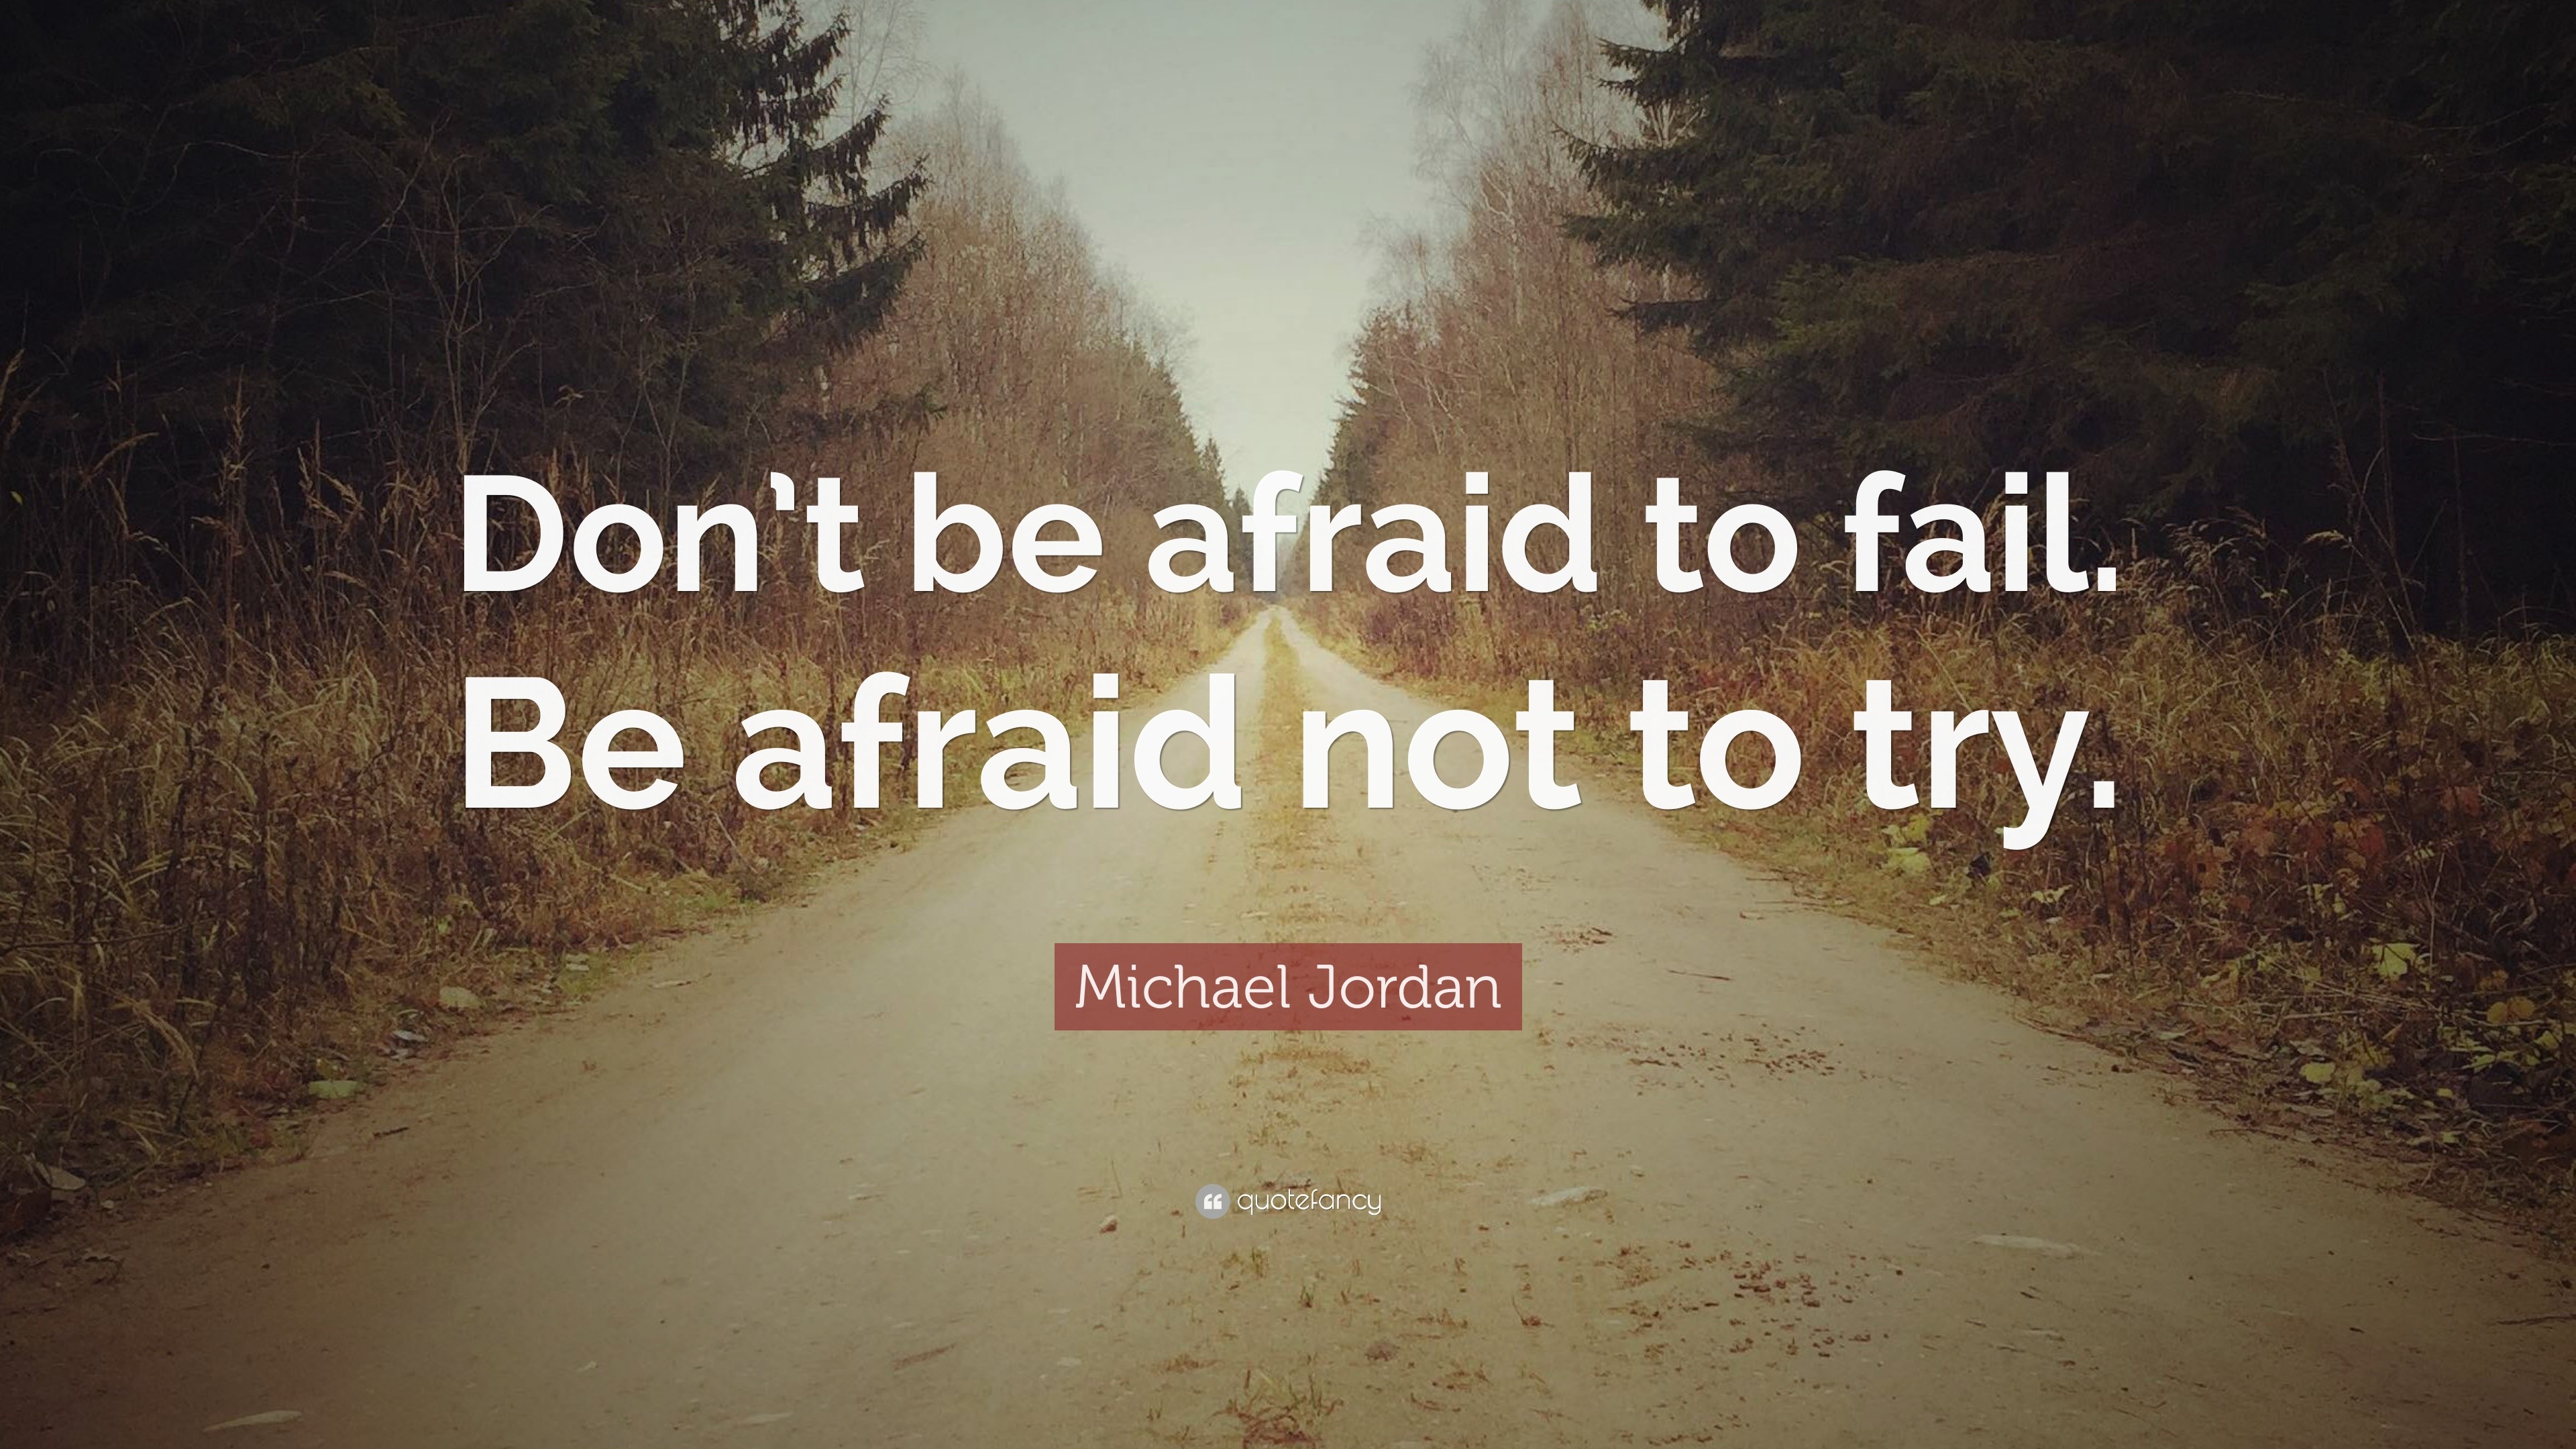 Michael Jordan Quote: “Don't be afraid to fail. Be afraid not to ...